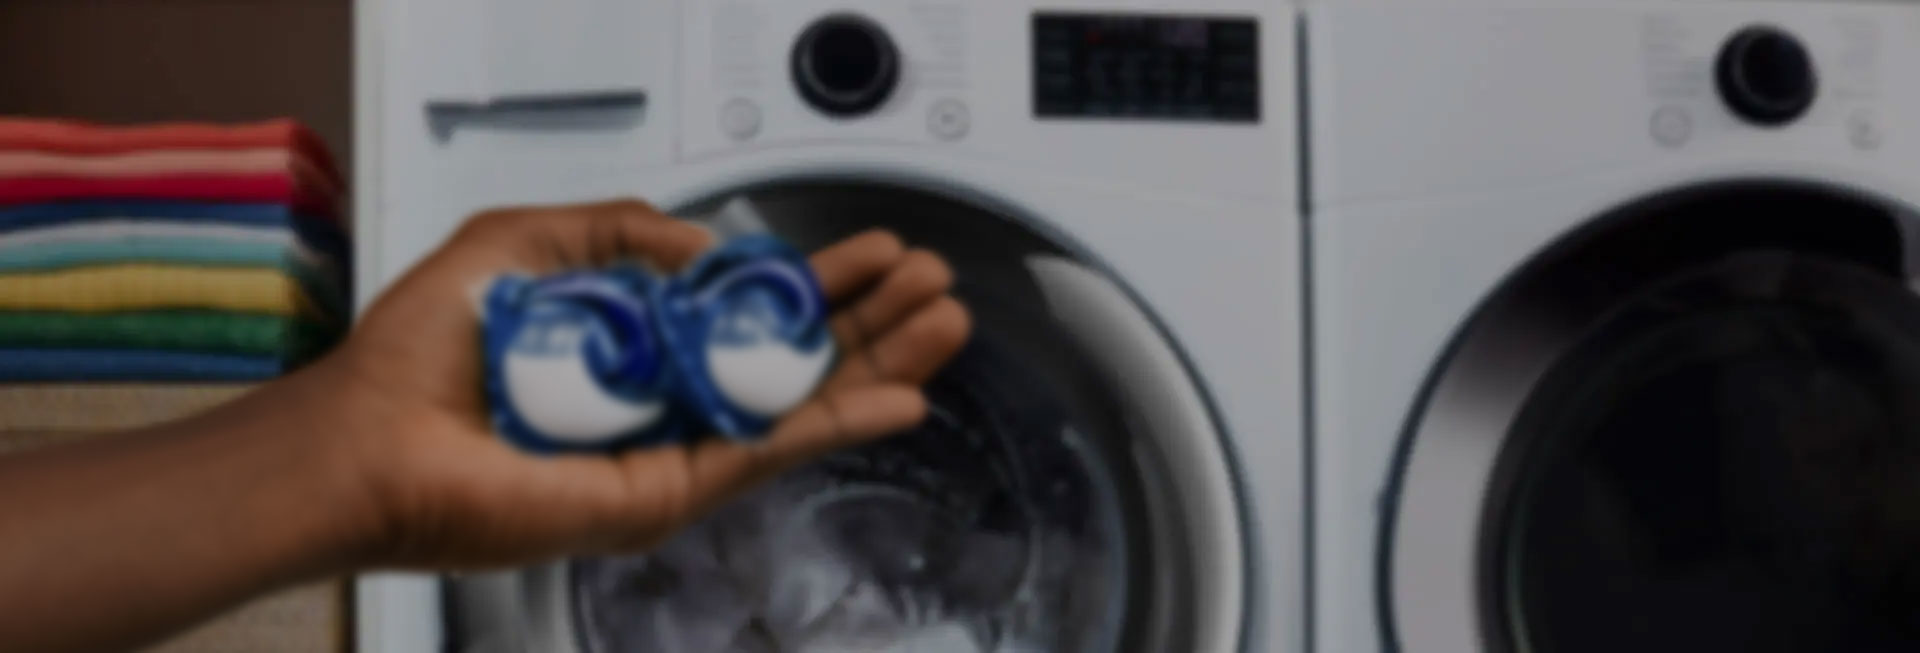 A person holding a Tide liquid detergent product in front of a washer